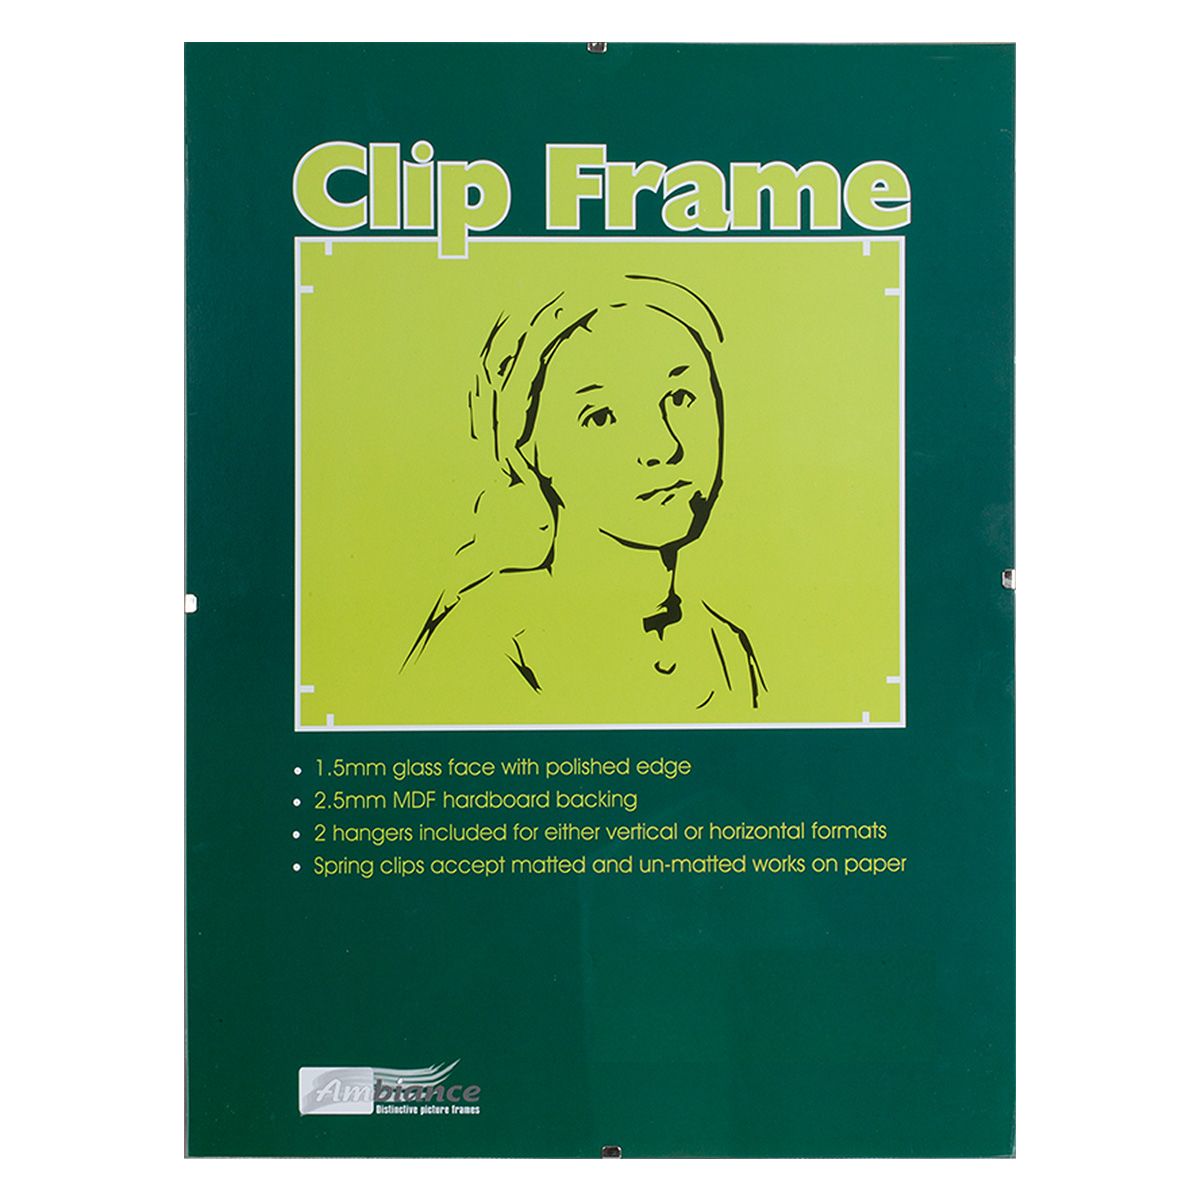 Ambiance Gallery Clip Frame, 12"x16"